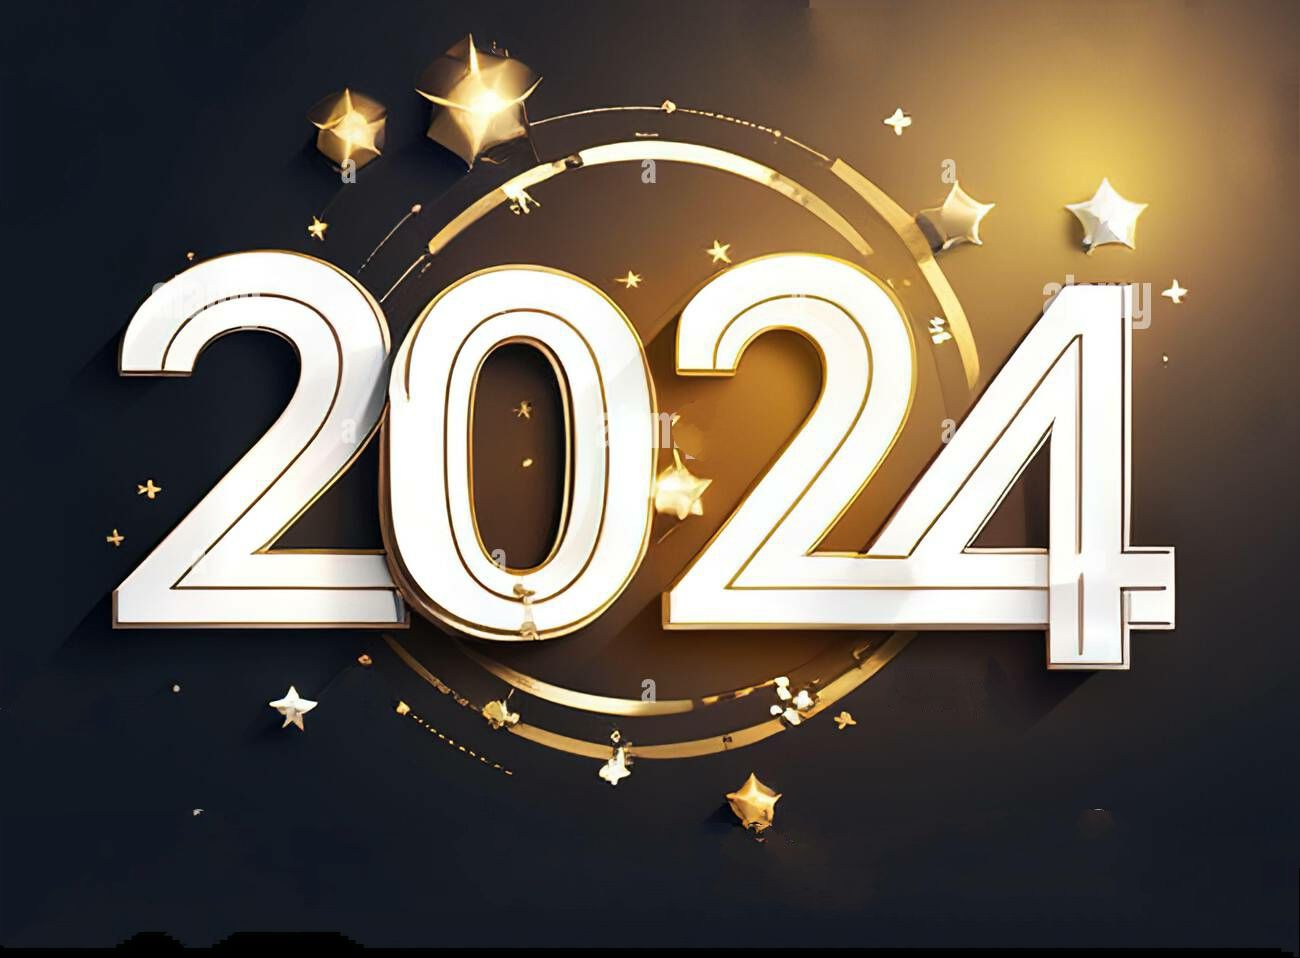 Happy New Year 2024 Wishes, New Year 2024 Picture HD. Happy new year wallpaper, New year wallpaper hd, Happy new